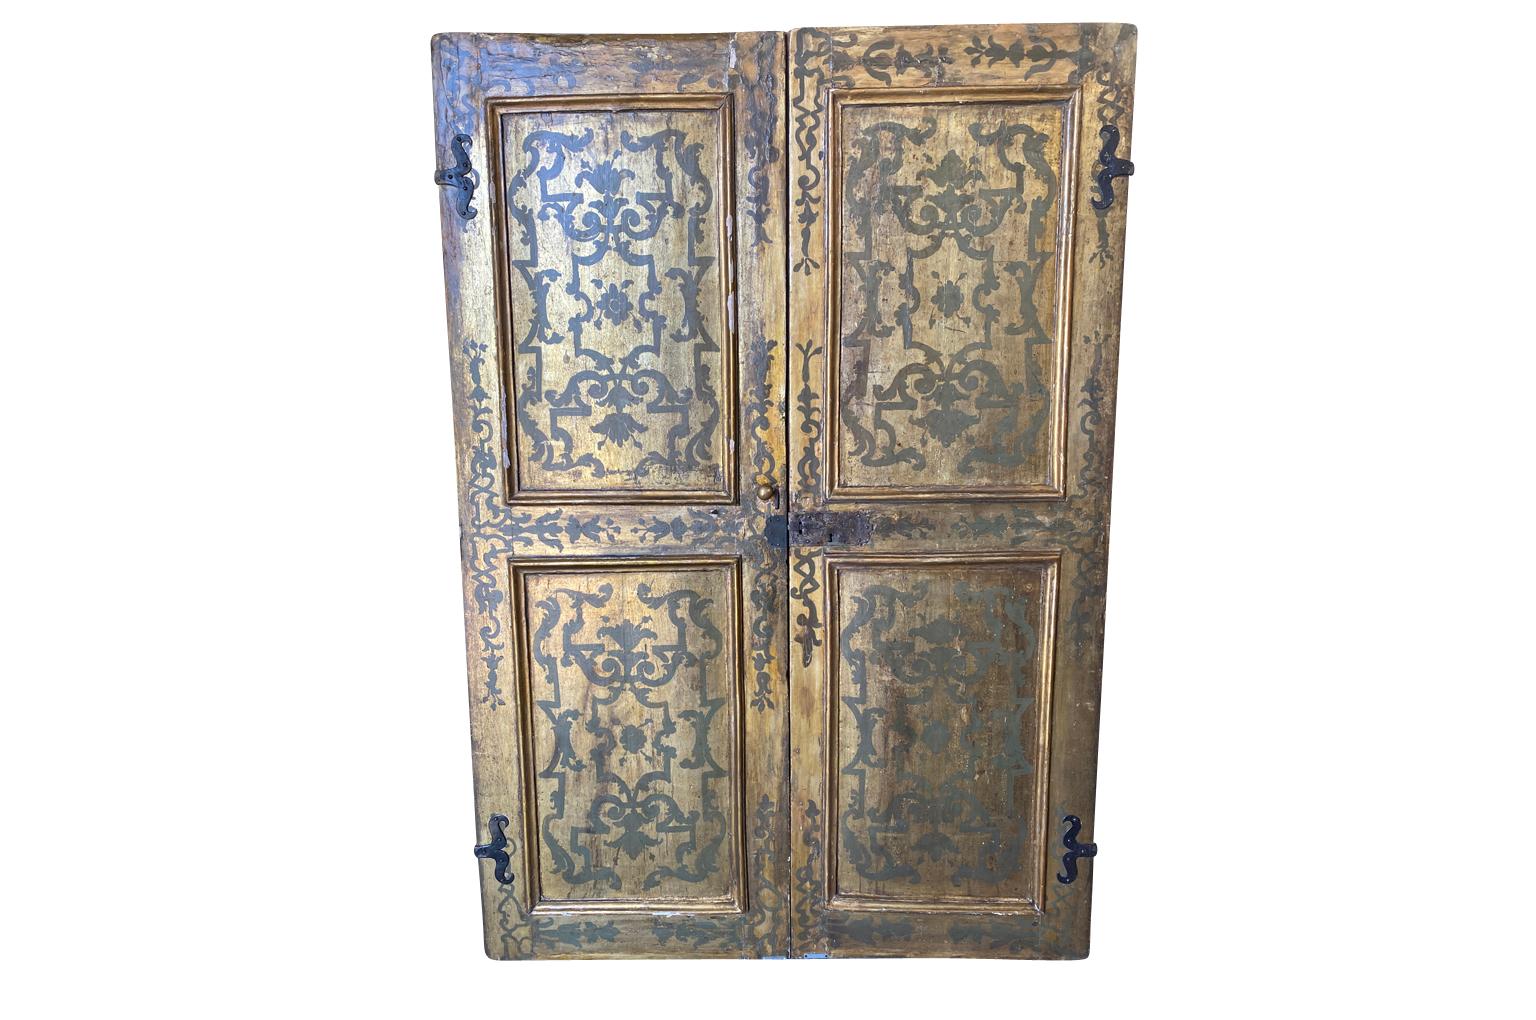 An exceptional and truly outstanding pair of doors from the Lucca, Italy. Wonderfully constructed from polychromed and gilt wood - retaining their original mercury mirror. The doors are wonderfully finished on both sides. Tremendous quality with